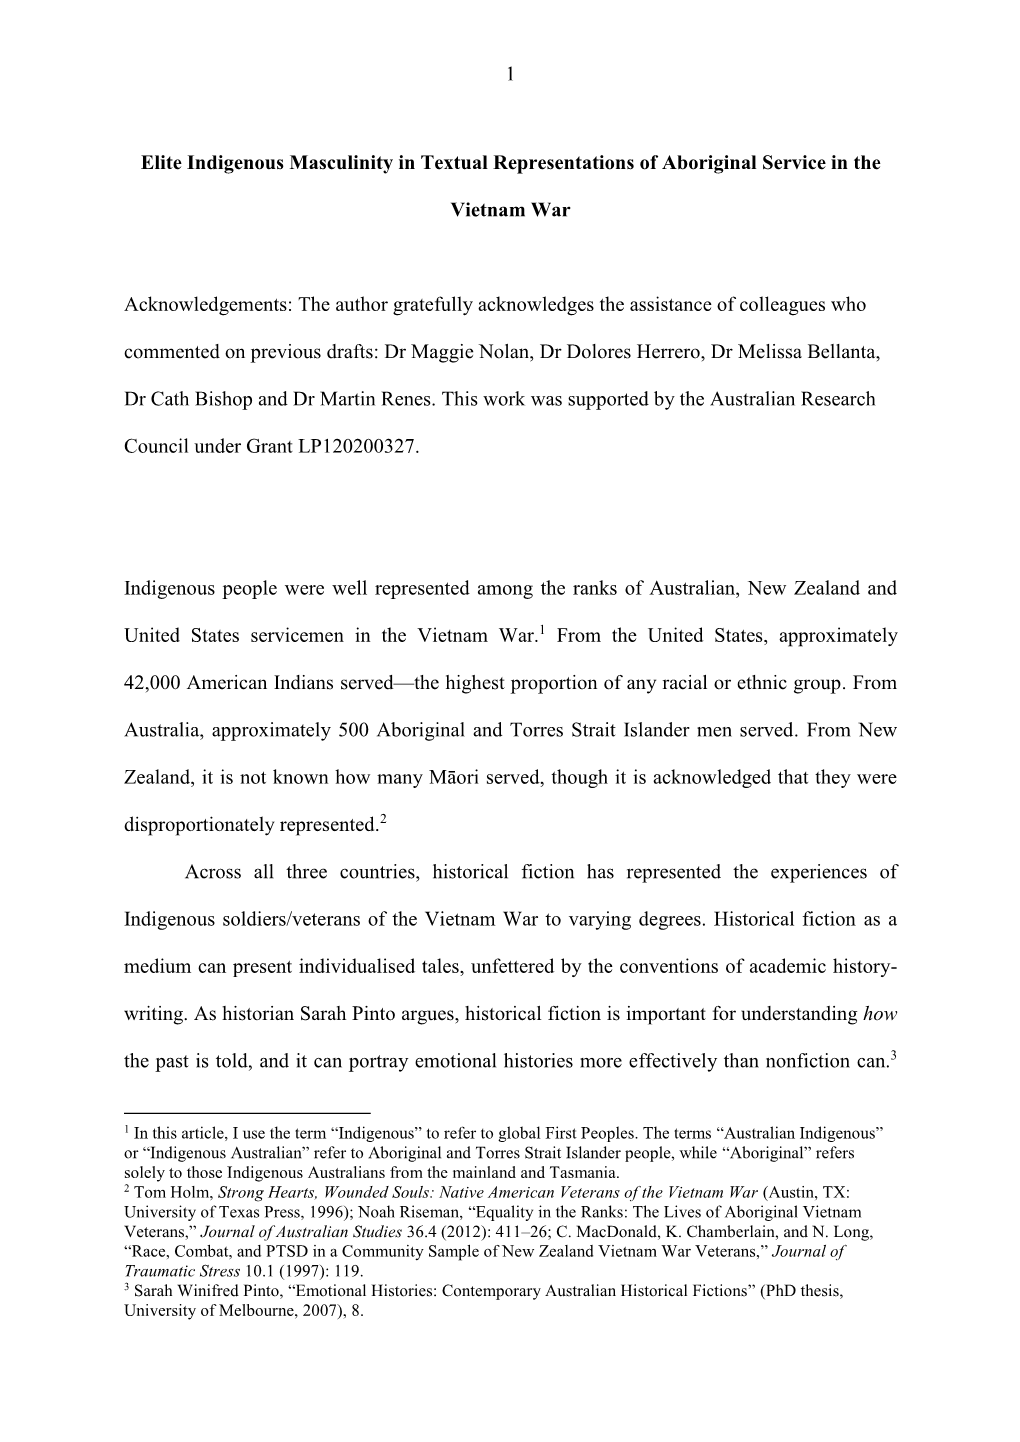 Elite Indigenous Masculinity in Textual Representations of Aboriginal Service in The